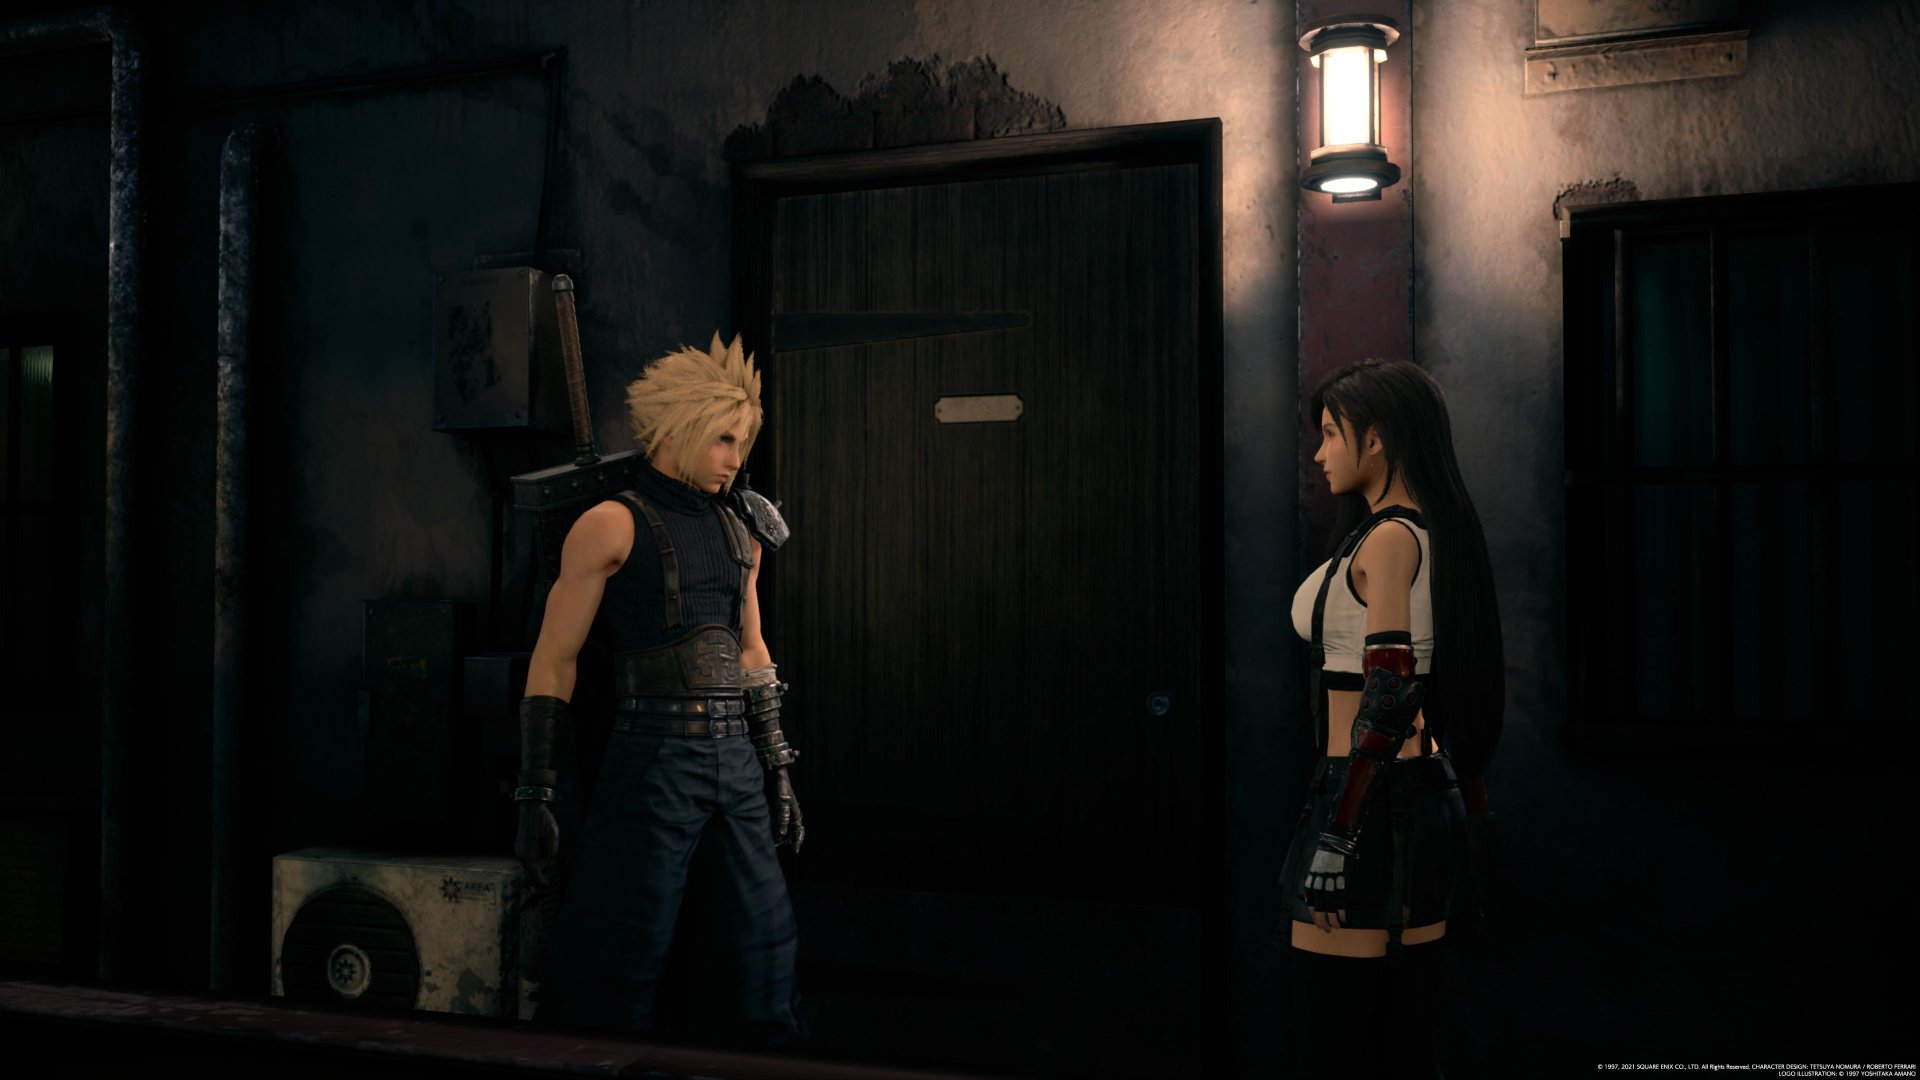 Final Fantasy 7 Remake Intergrade Review: The Best Way to Play